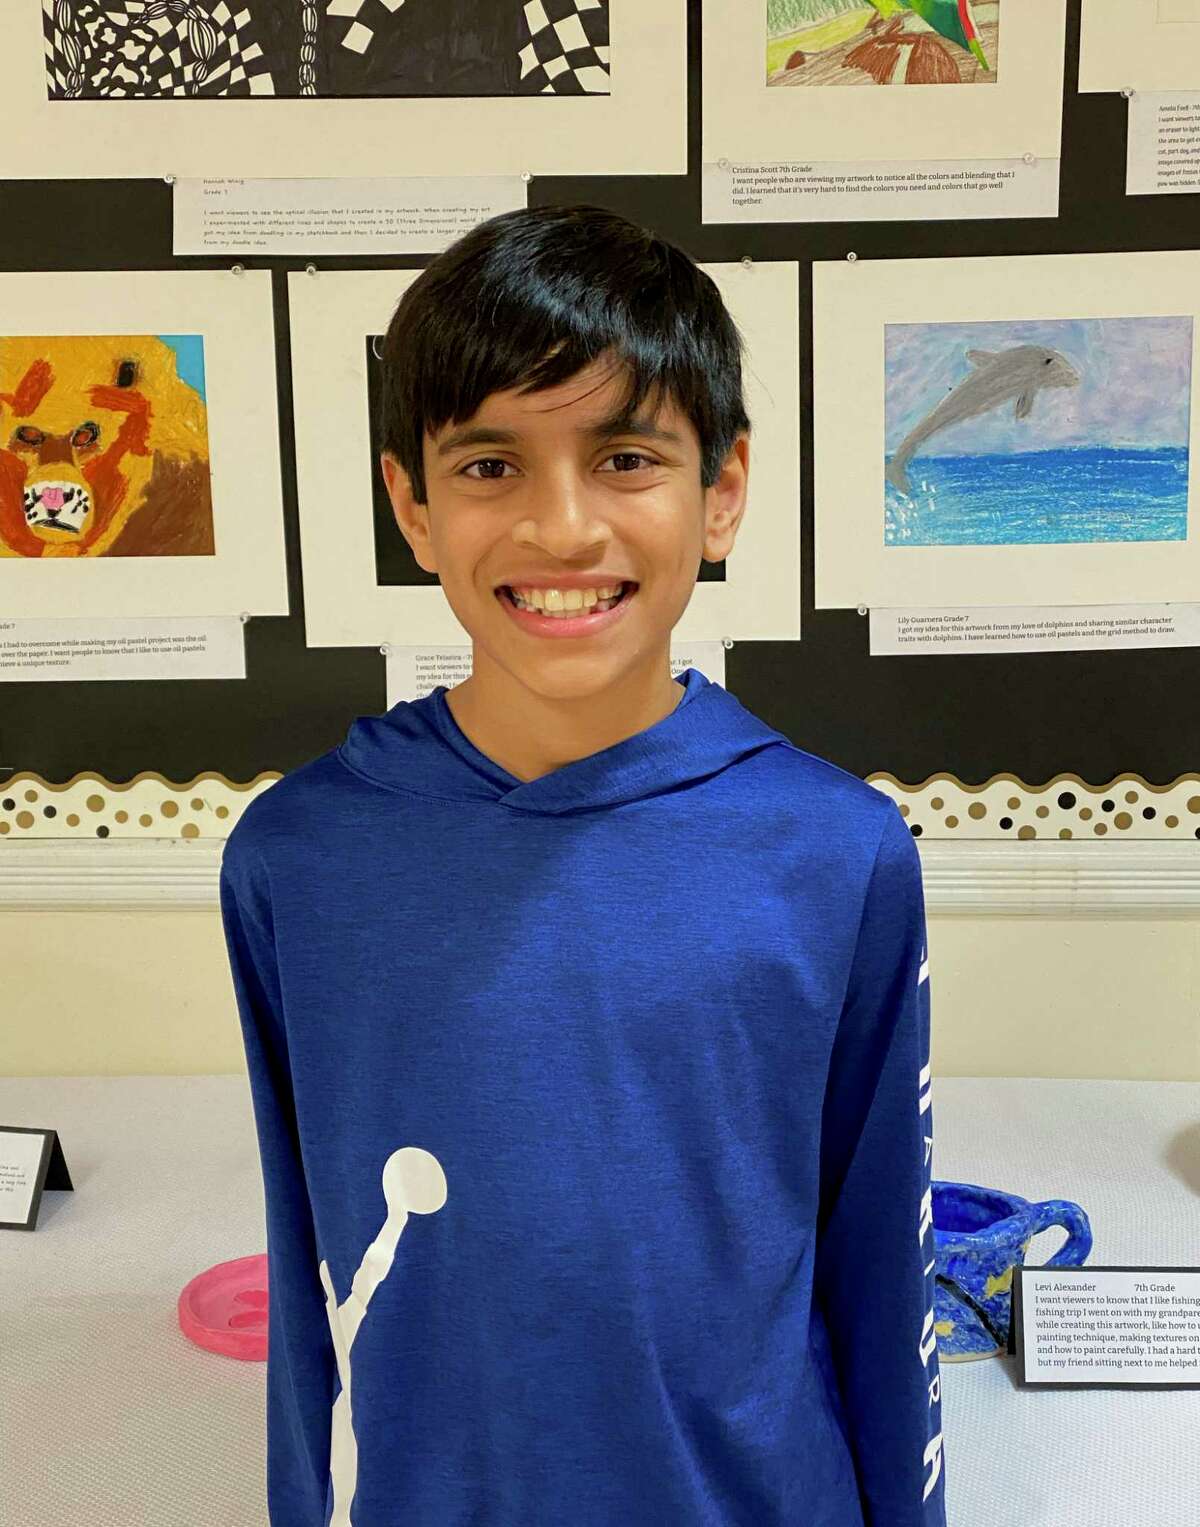 Sohan Javeri of Central Middle School in Greenwich is among the top 10 student finalists in the recent Fairfield chapter round of the Mathcounts competition and qualified for the state round of competition in Hartford.